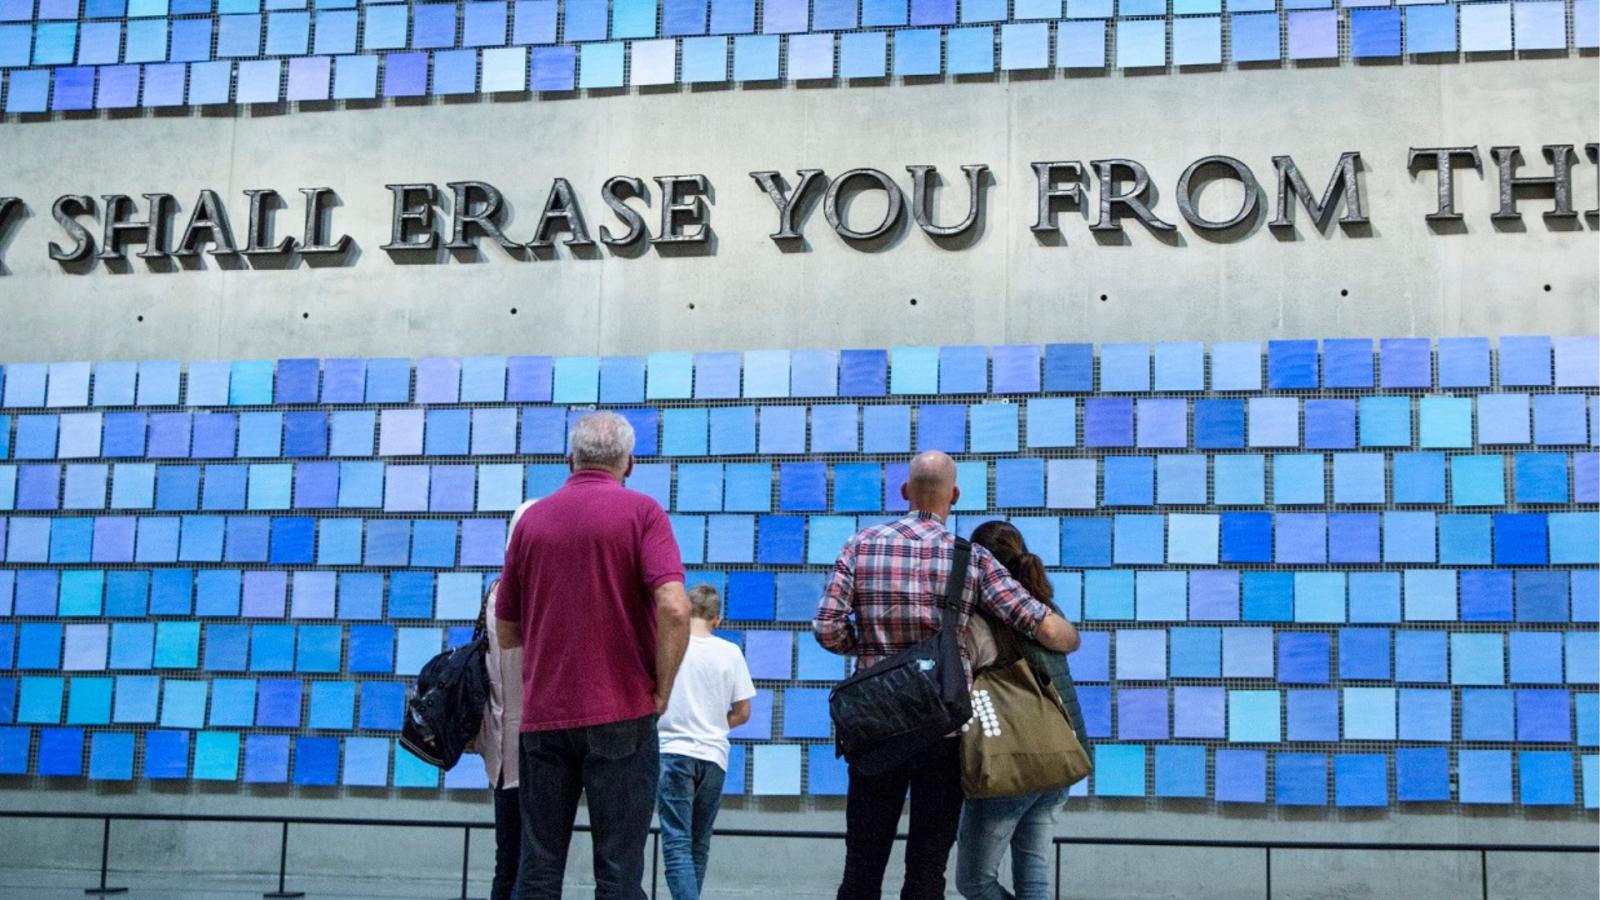 Patrons, seen from the back, look at a blue tiled art installation